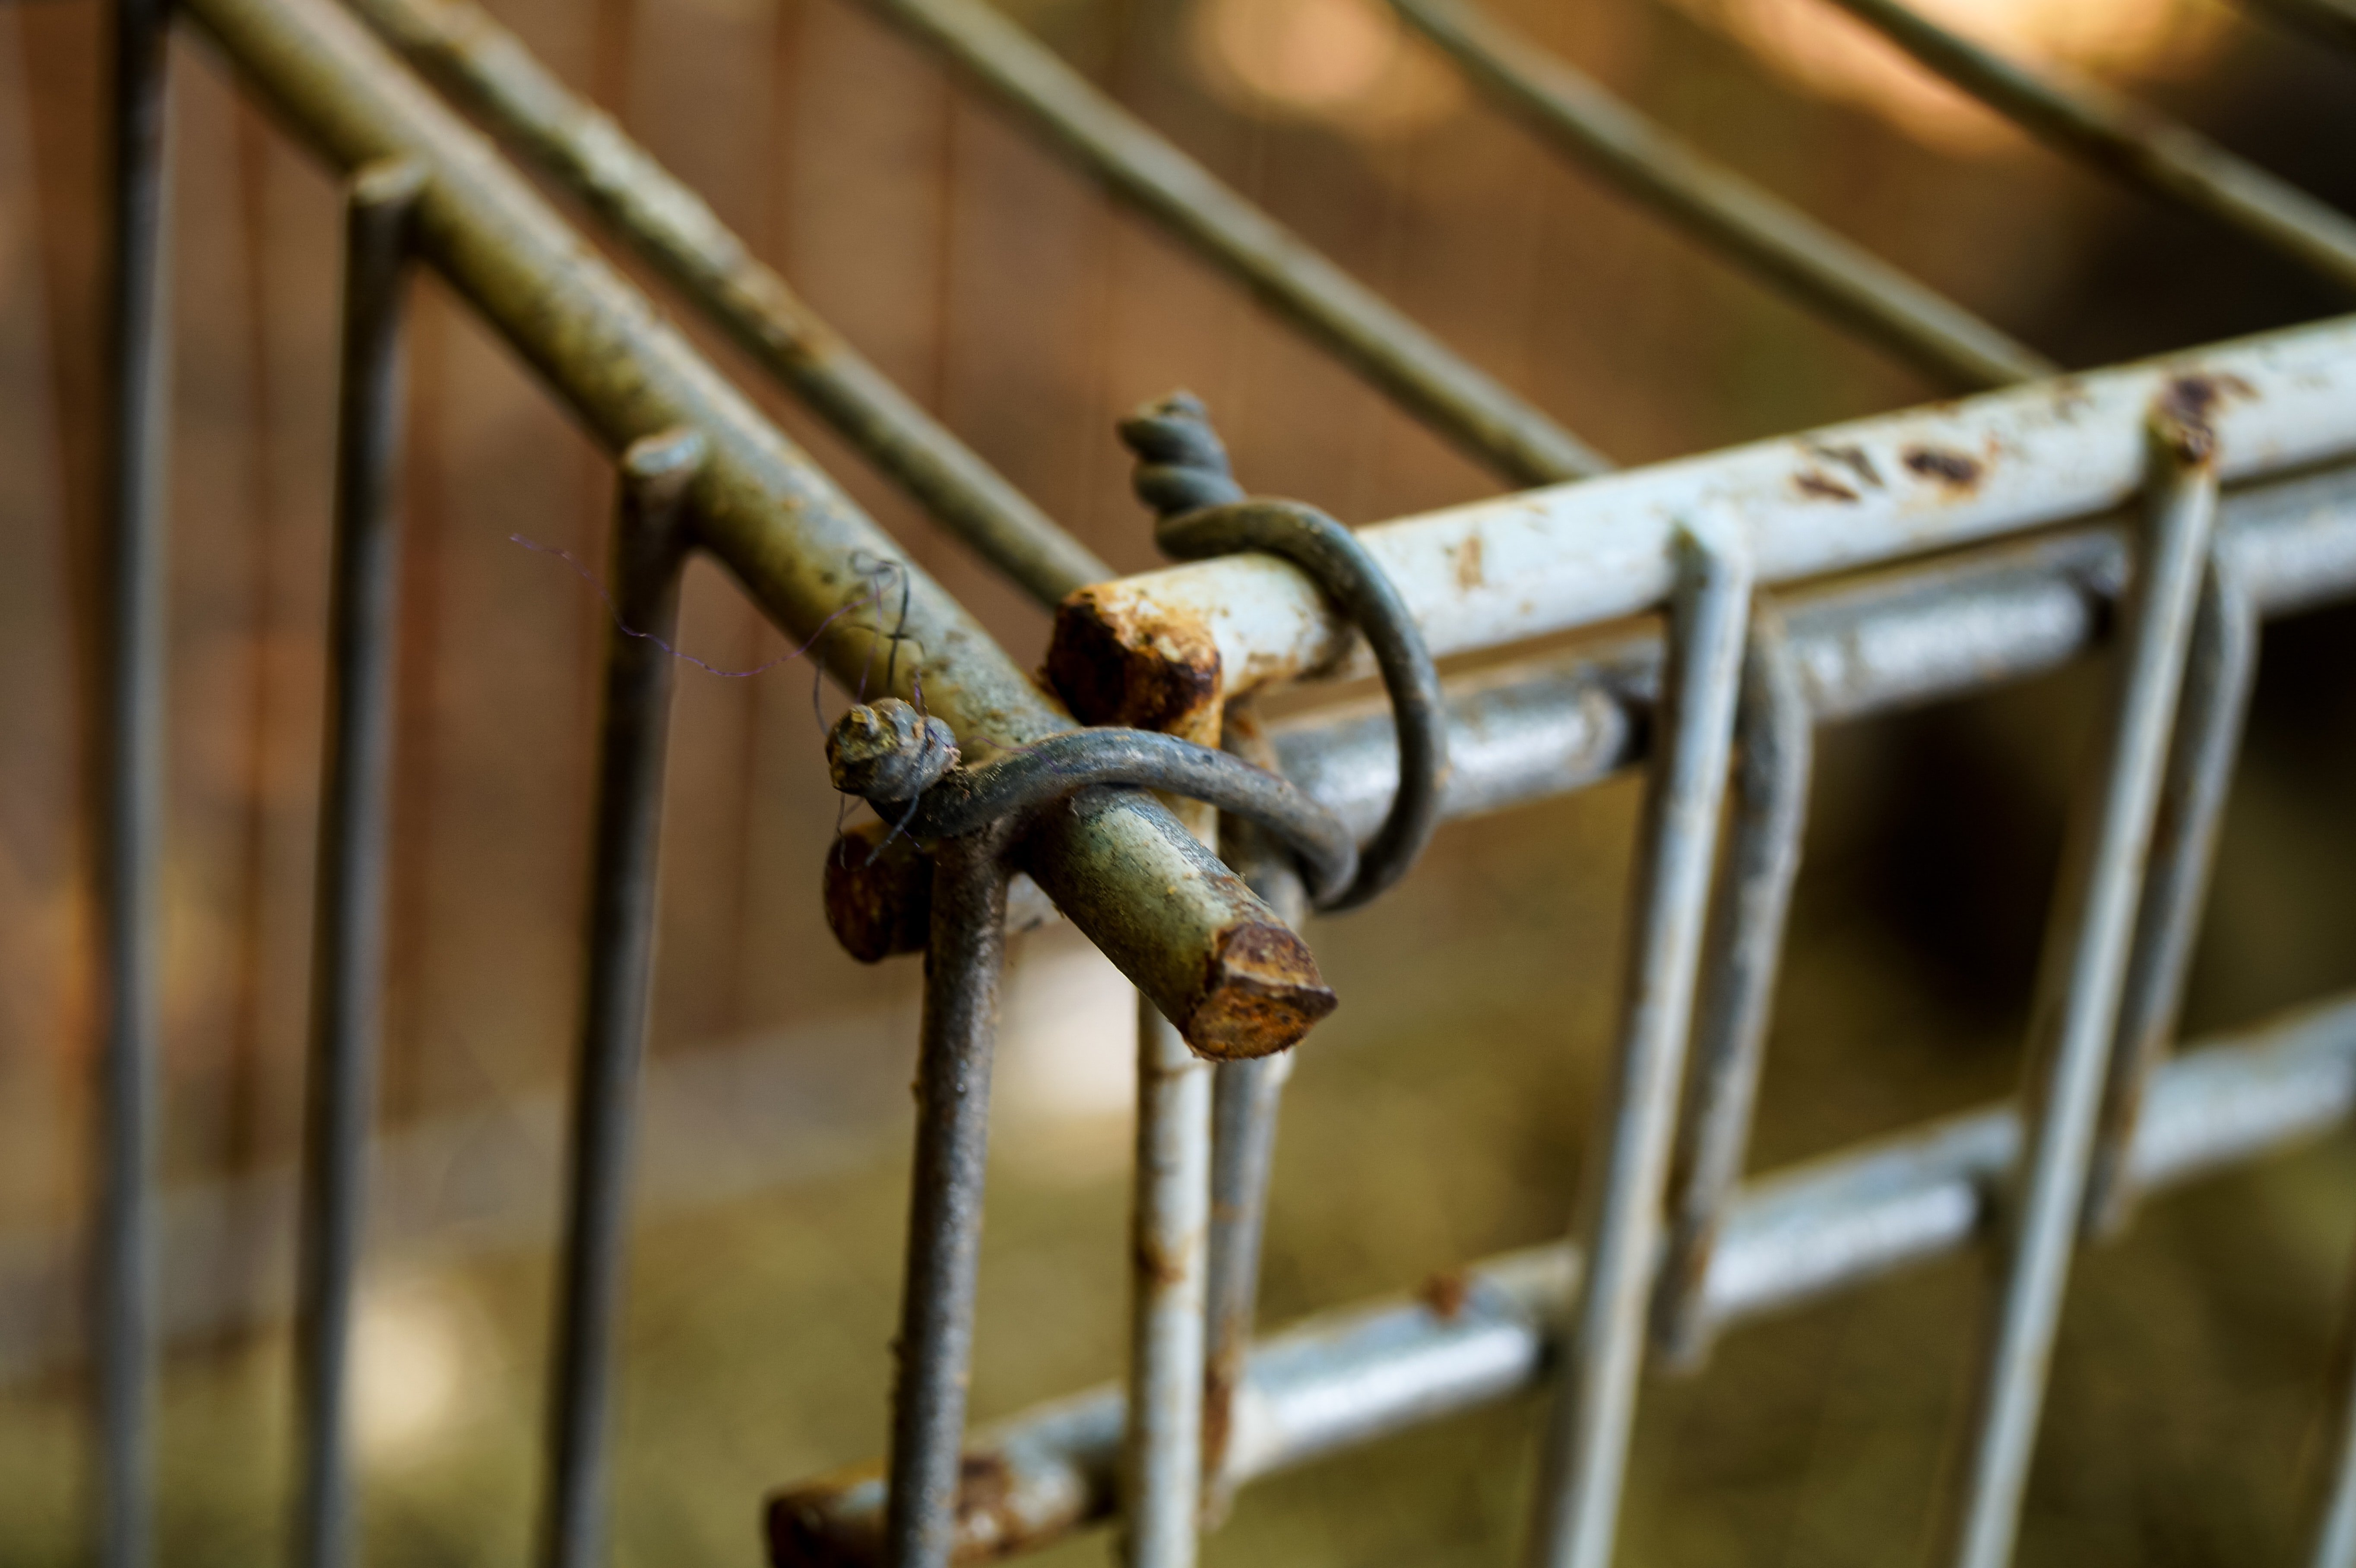 Sam was disappointed to discover the key opened a rusty old cage. | Source: Unsplash